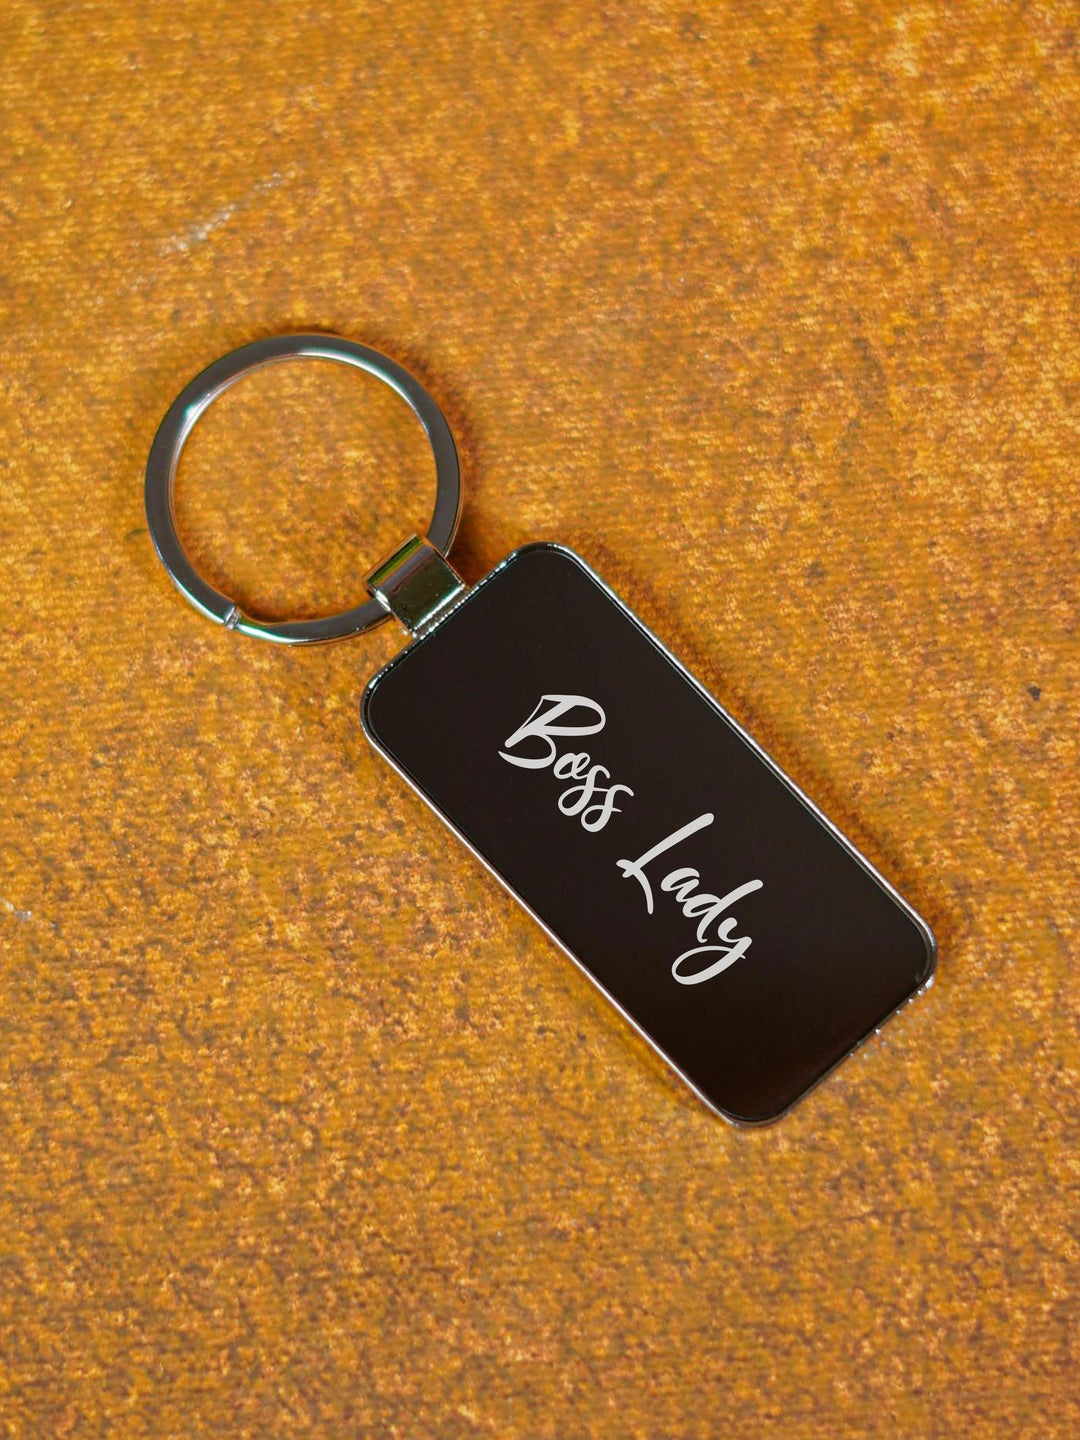 Corporate Gift - Customized Keychain - BCG0162